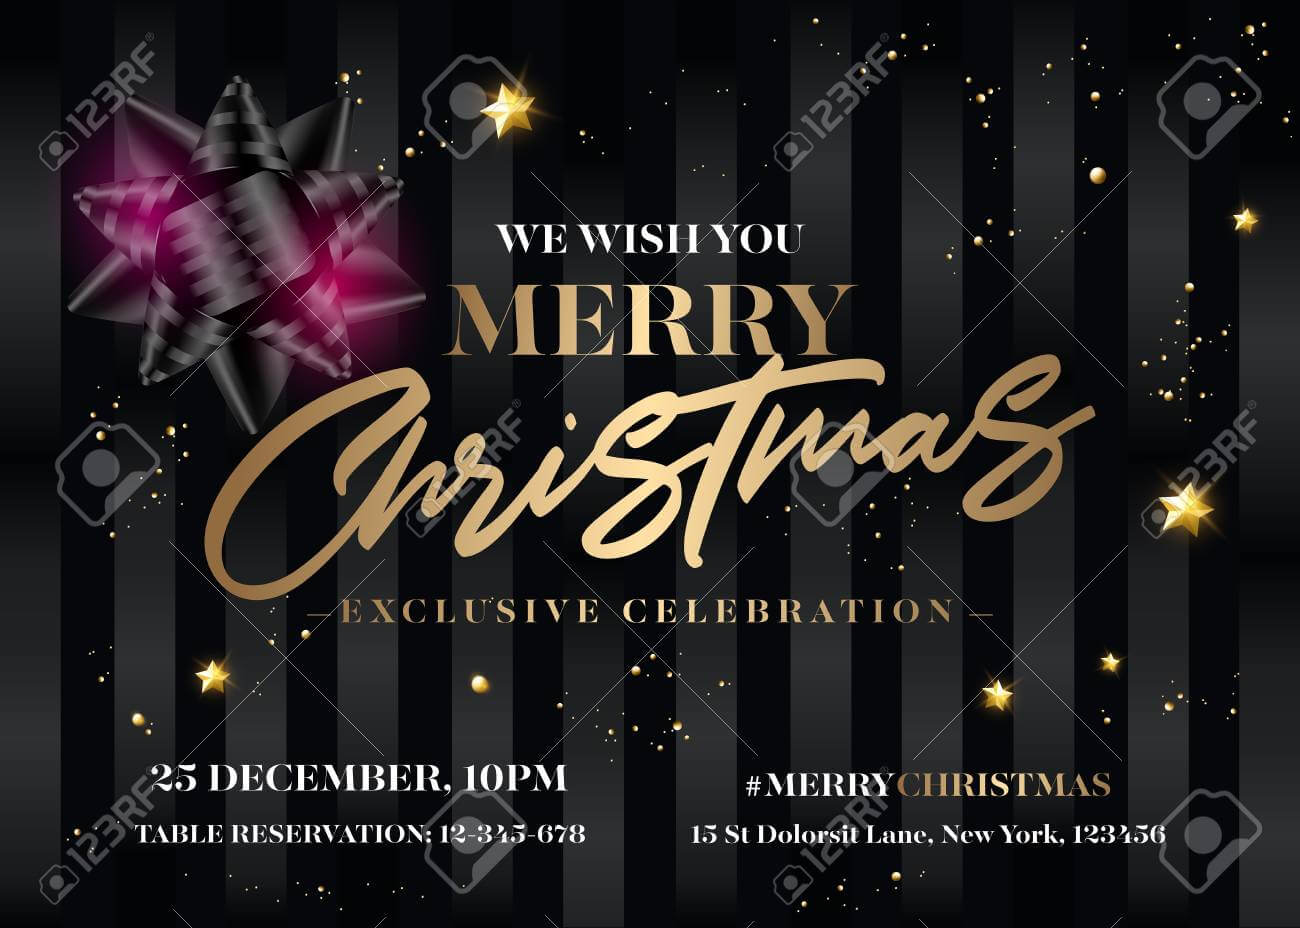 Chirstmas Invitation Card Template. With Table Reservation Card Template